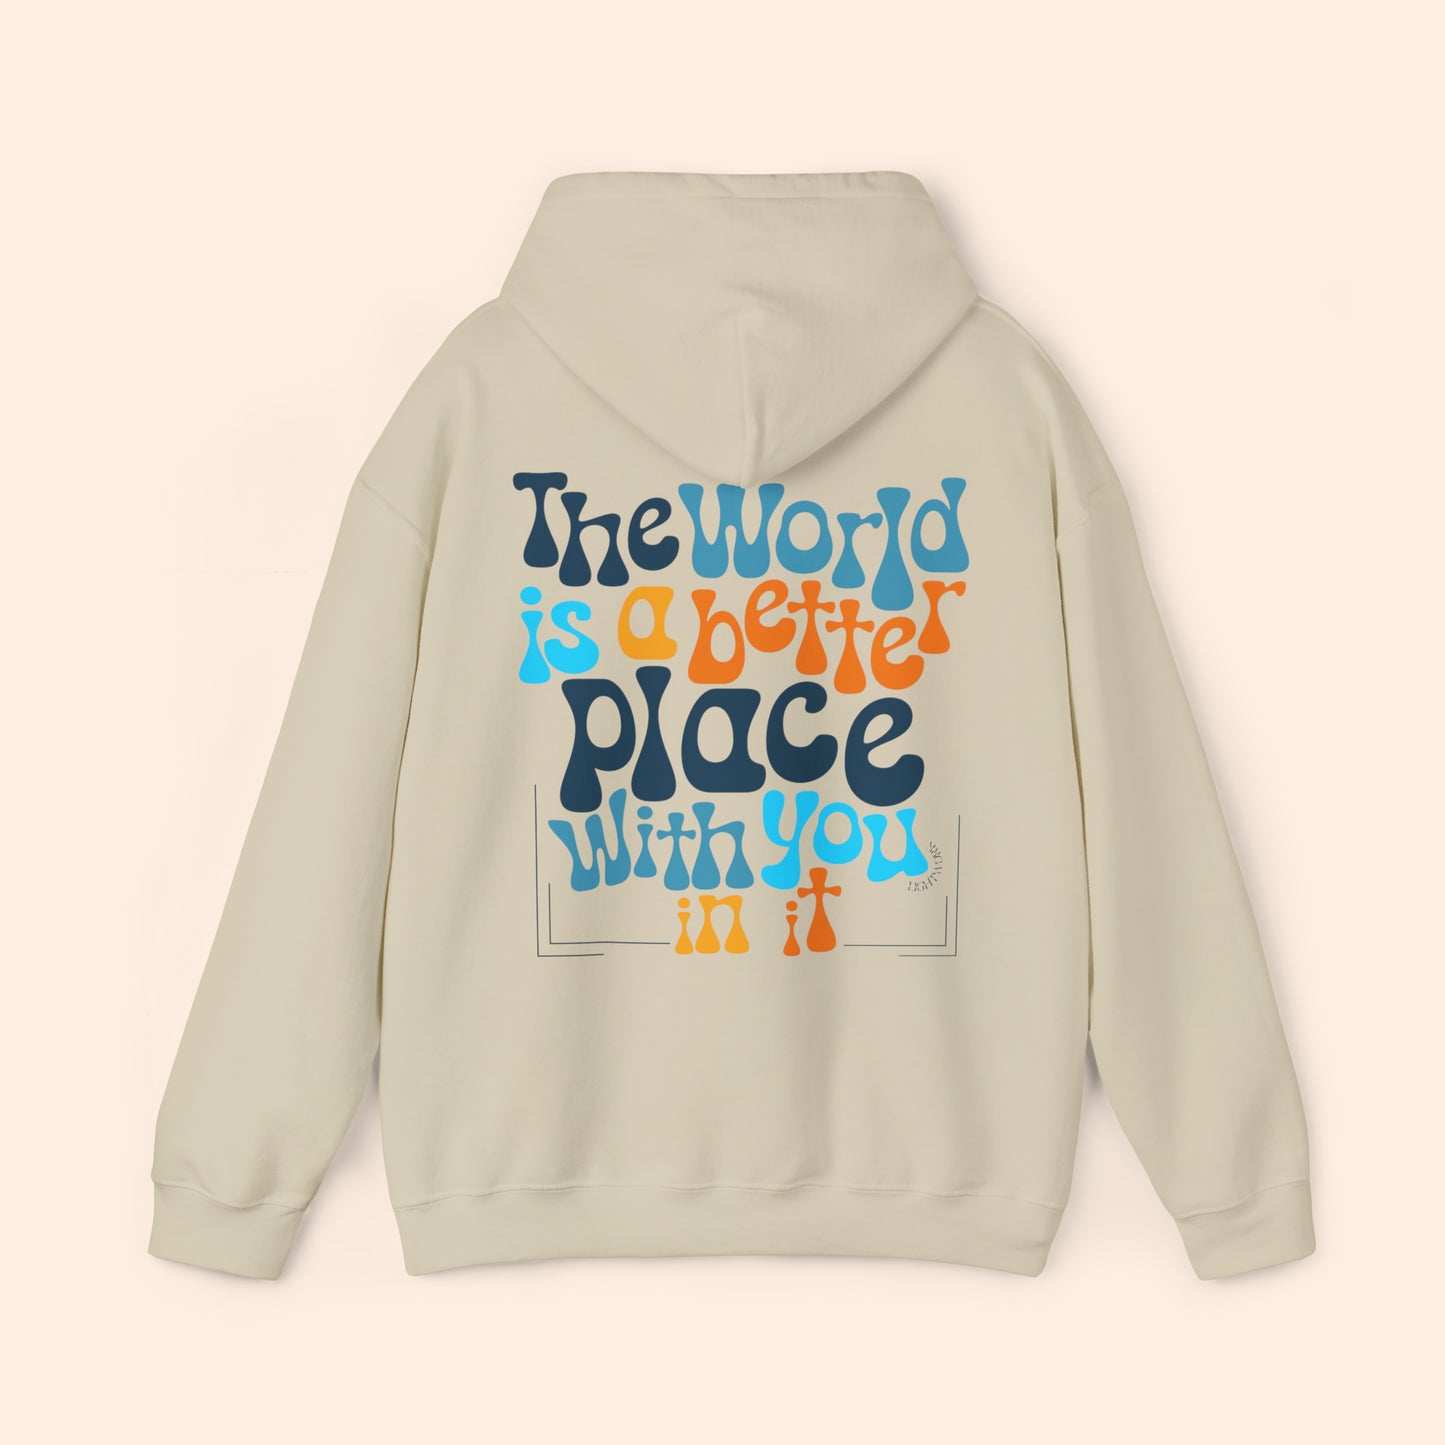 The World Is a Better Place with You Hoodie